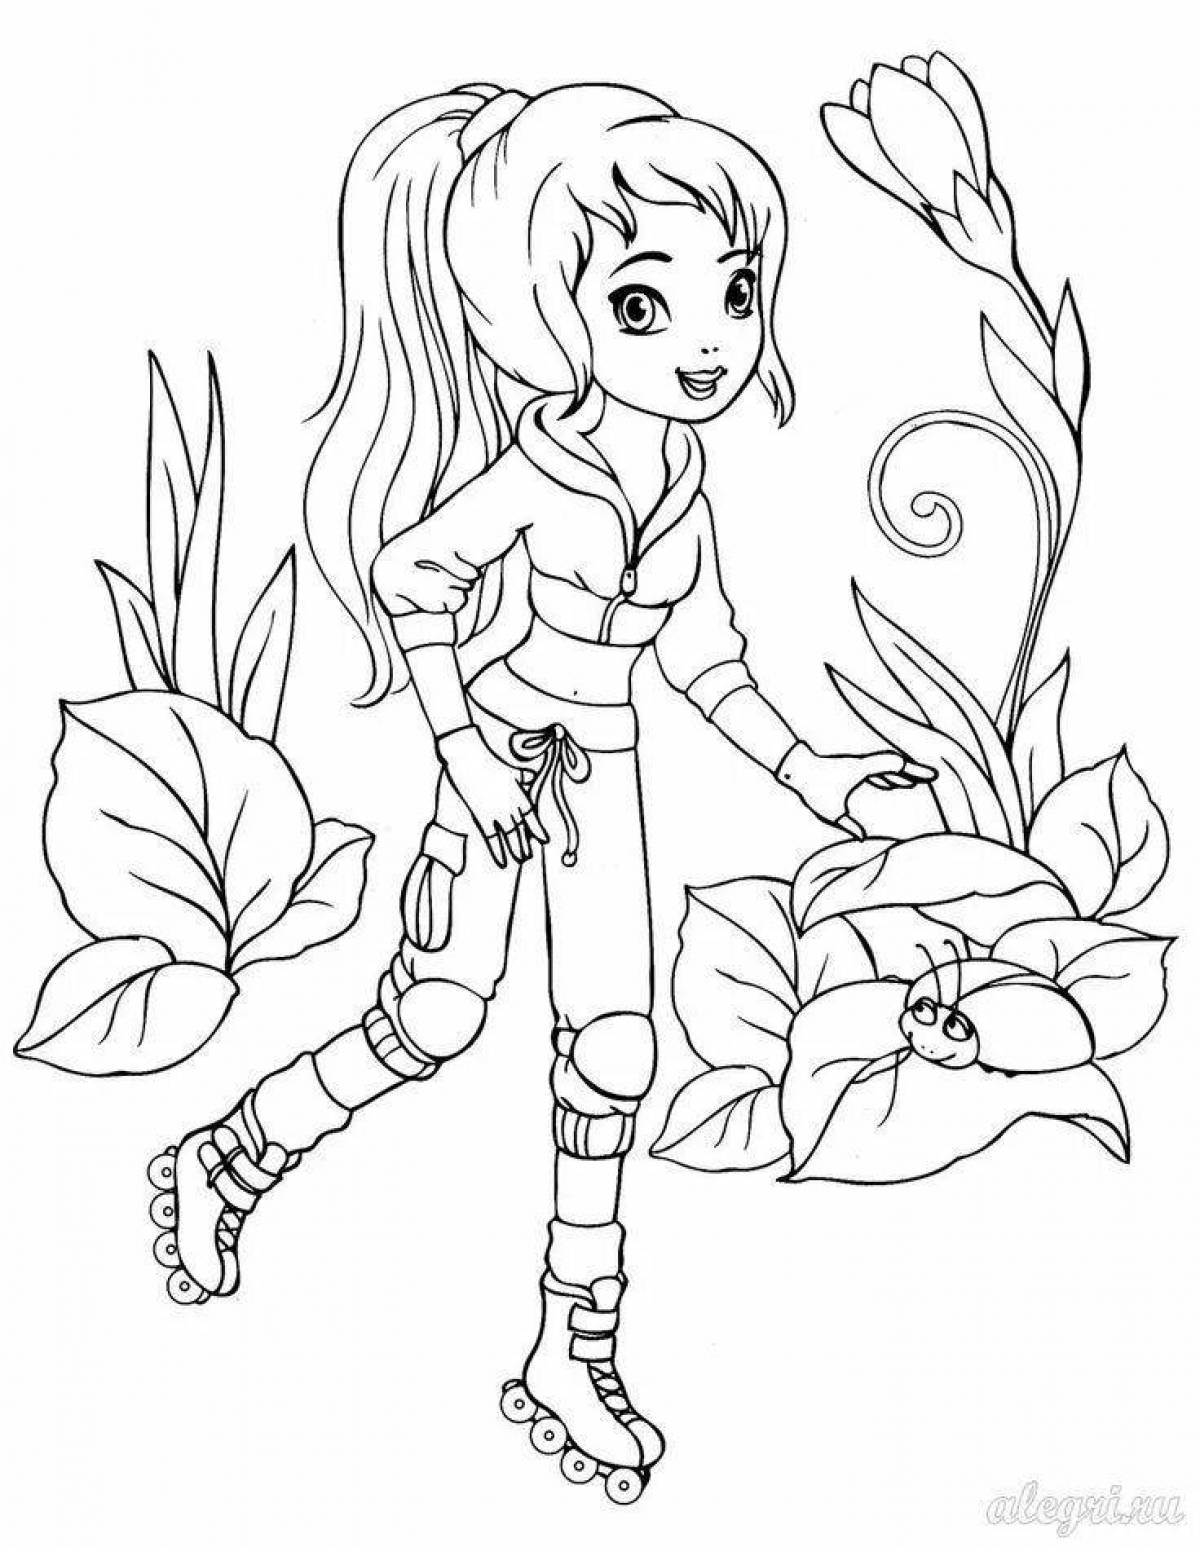 Coloring page charming anya forger